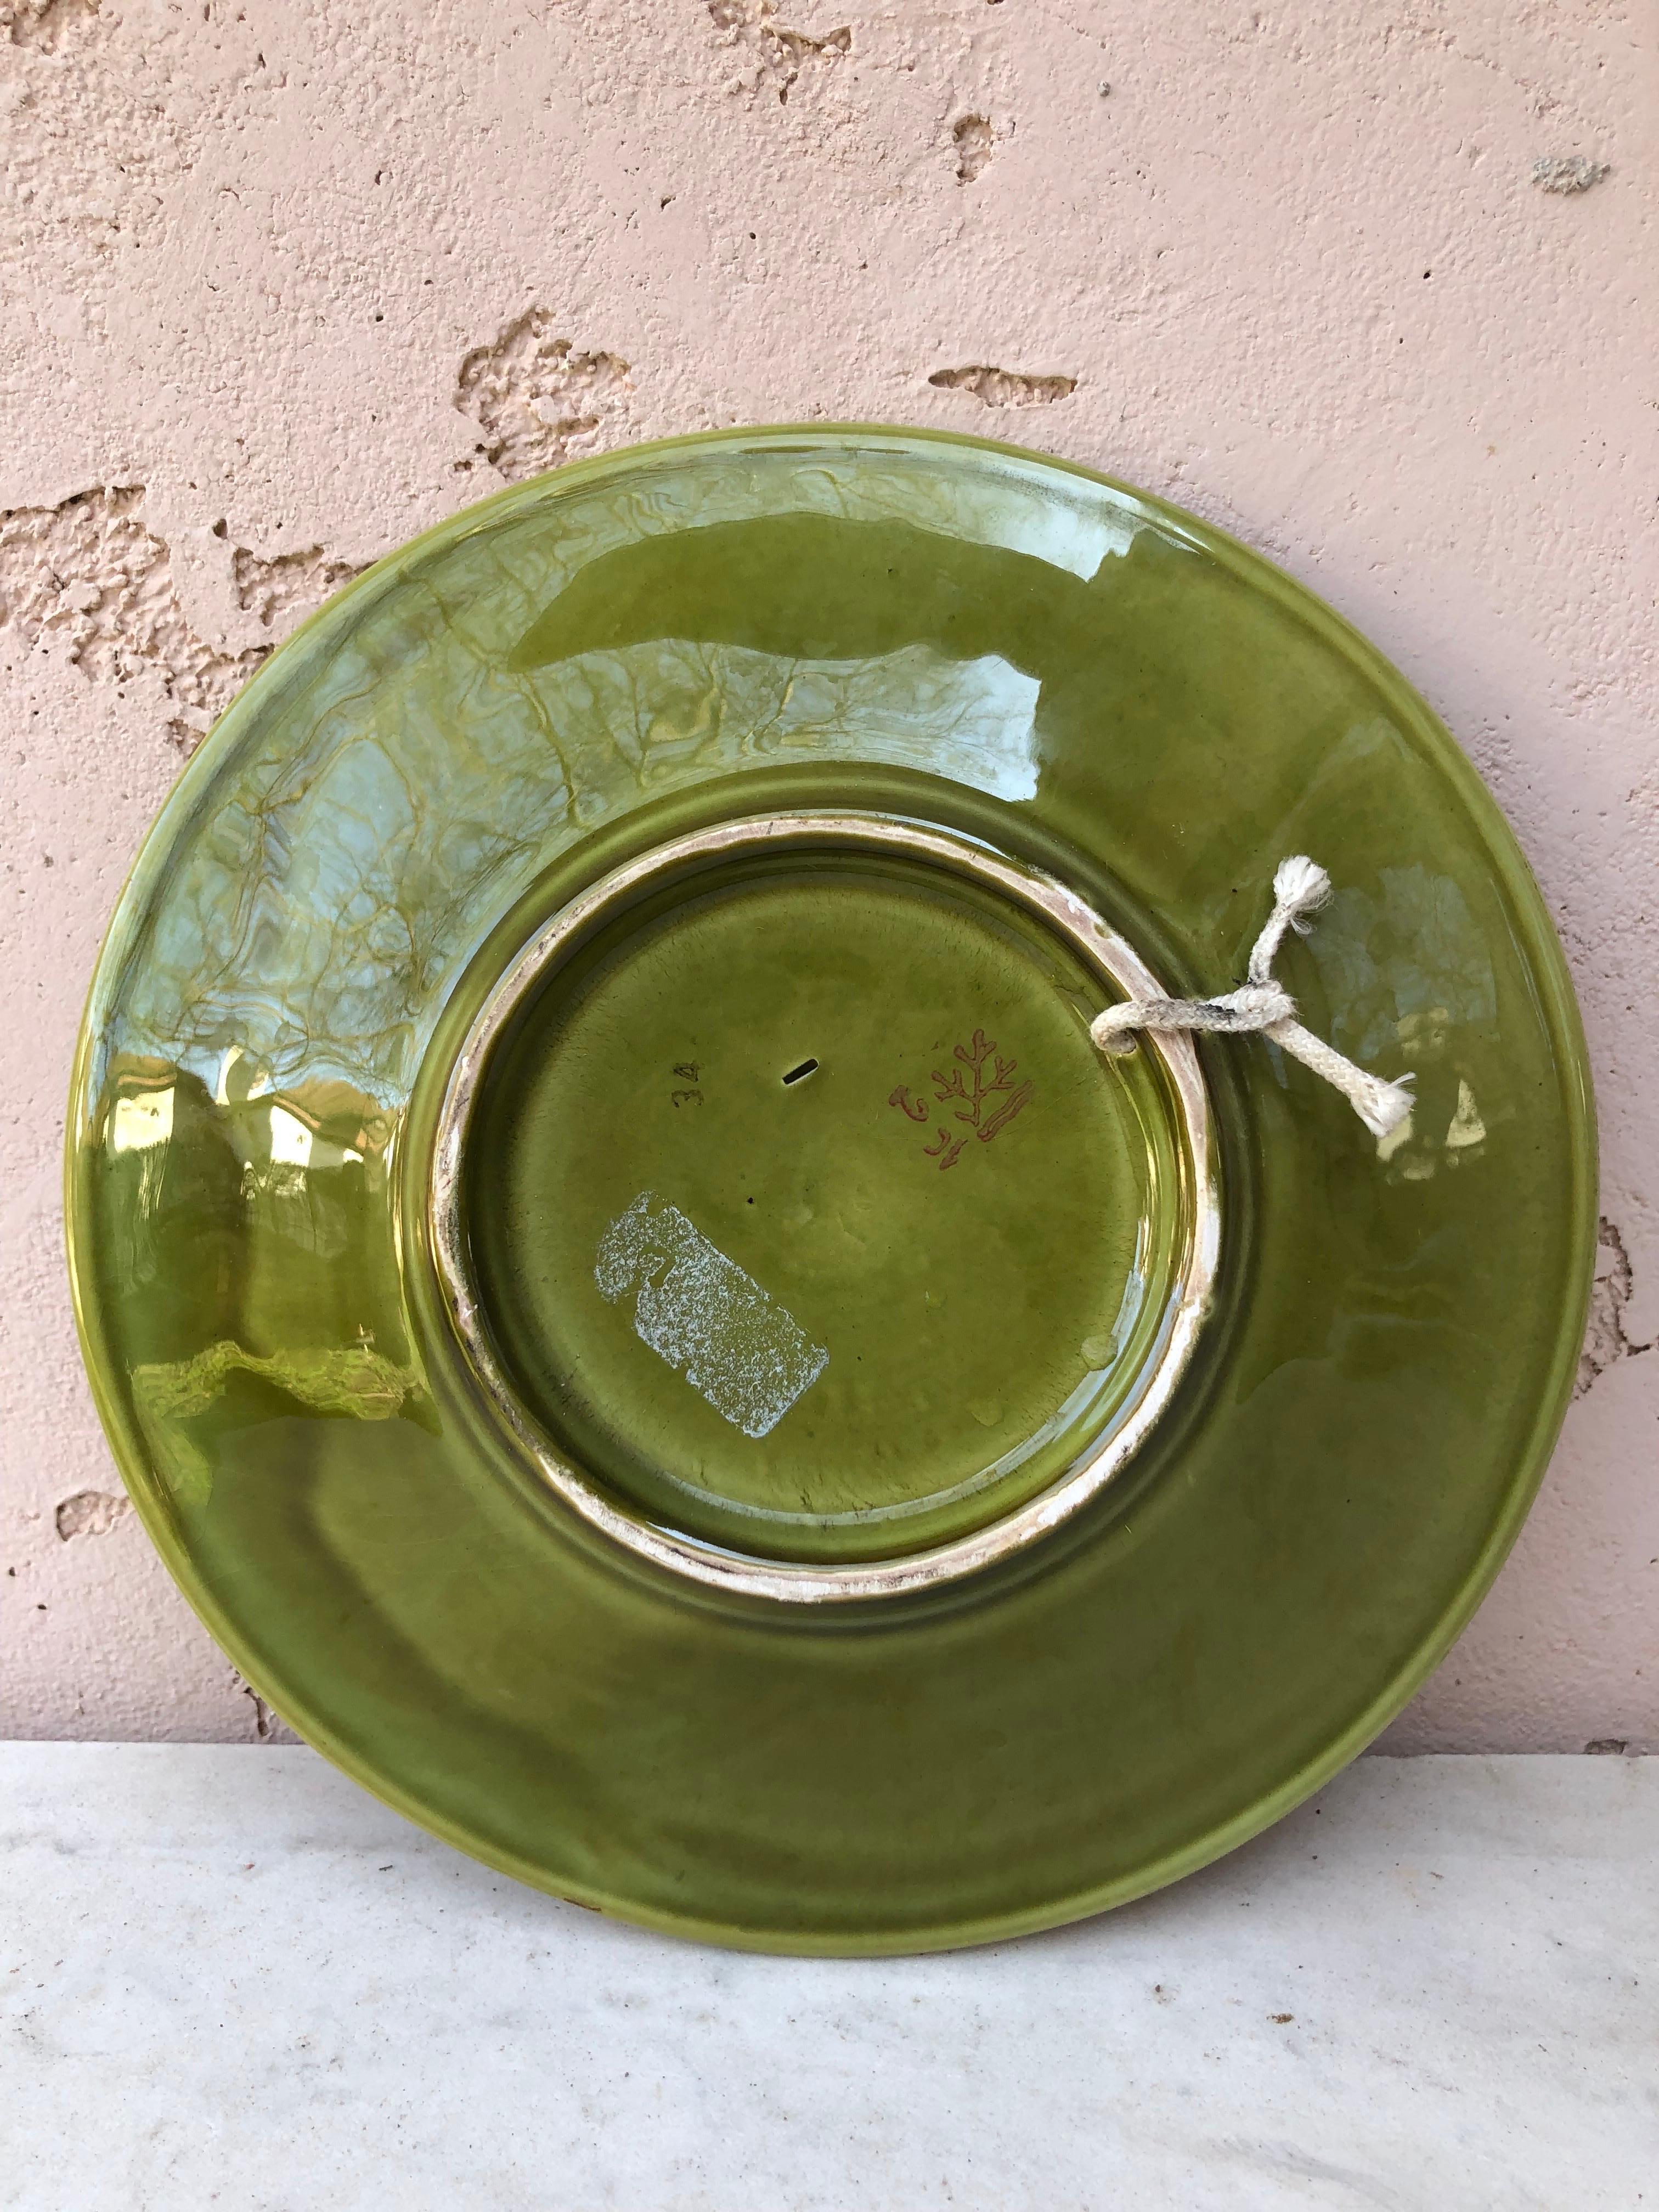 Rustic French Green Majolica Plate with Leaves Circa 1890 For Sale